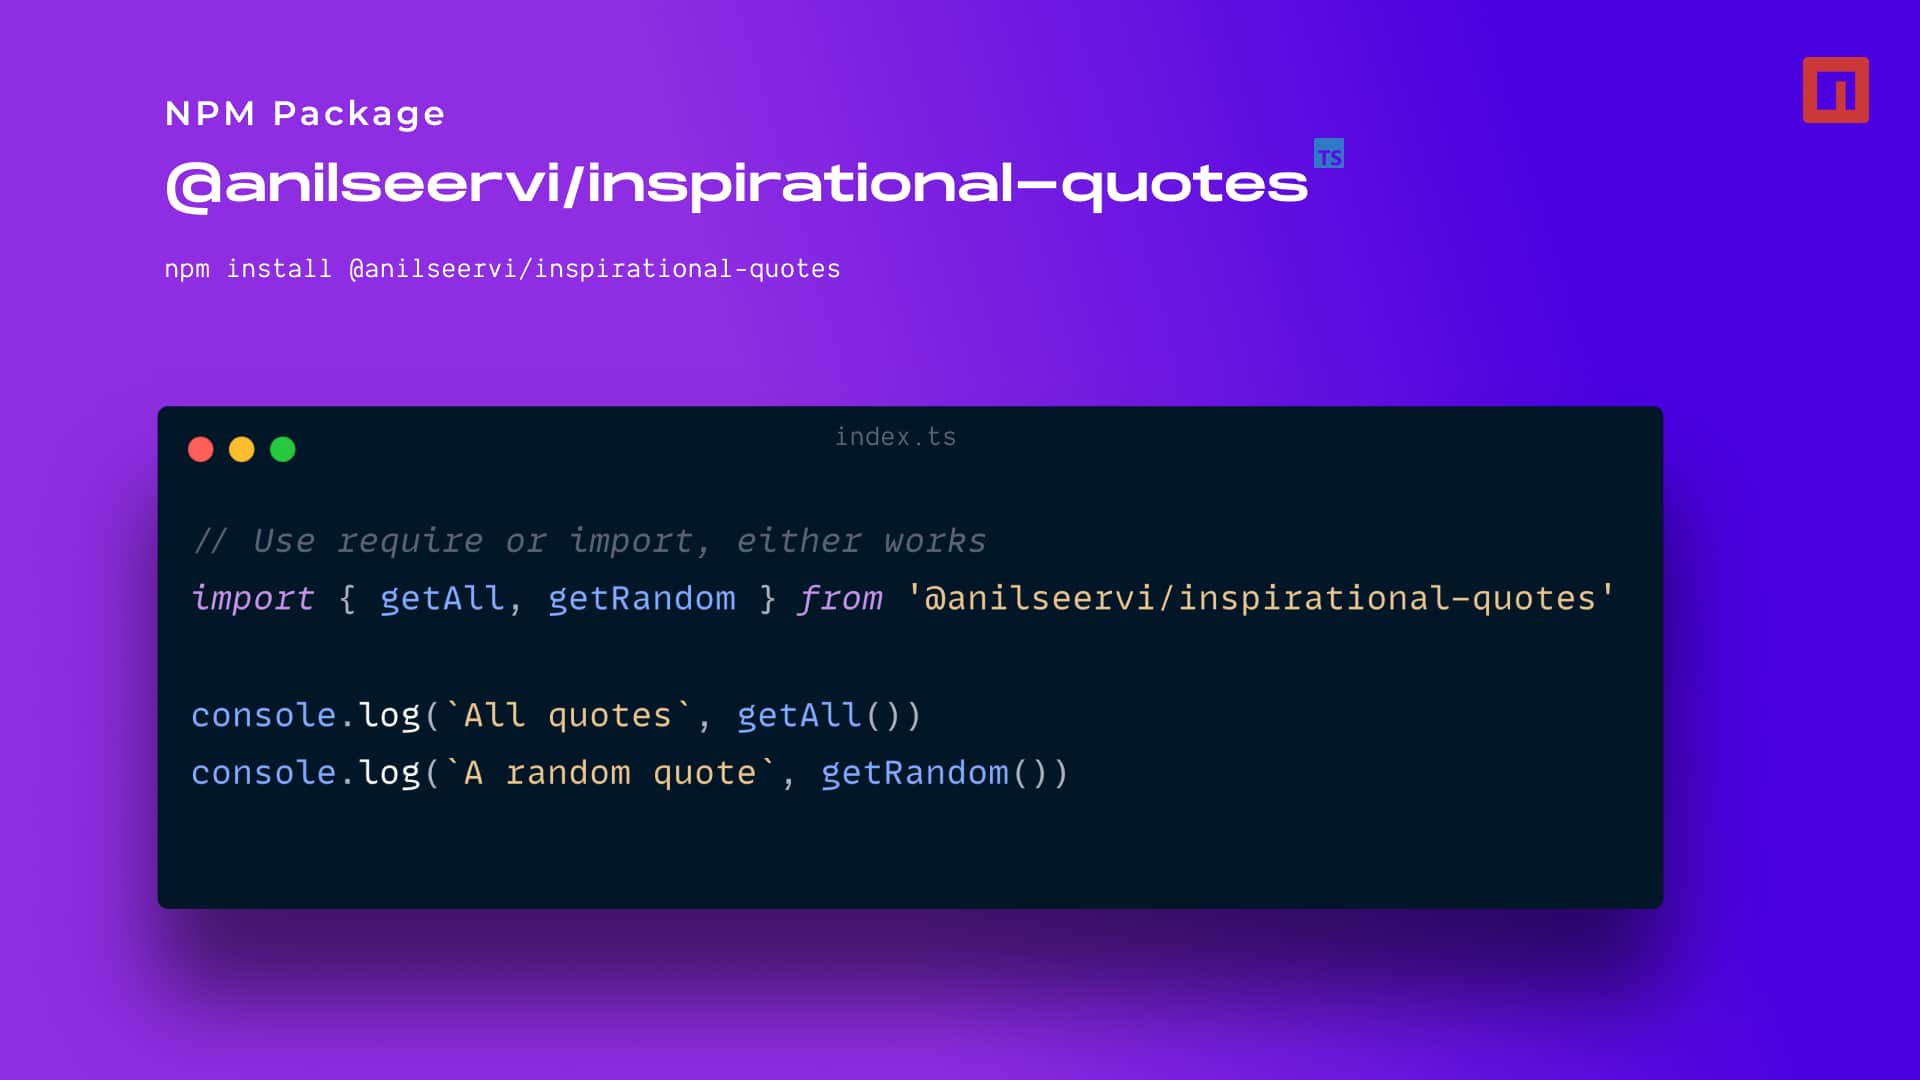 Inspirational-Quotes NPM package example